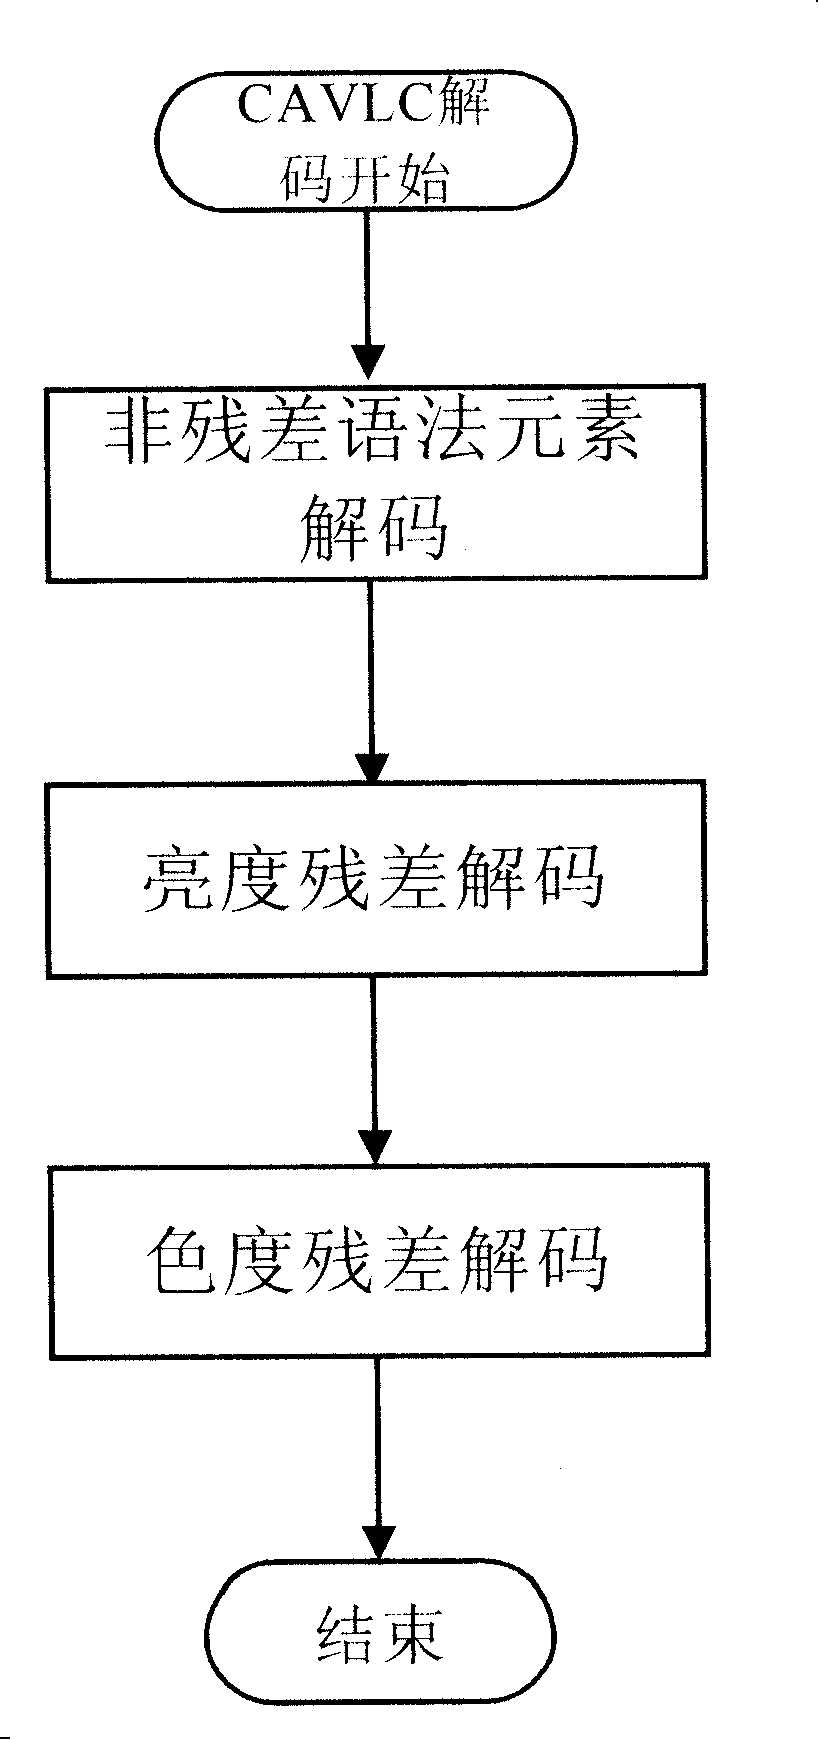 Method and device for implementing entropy decoder based on H.264